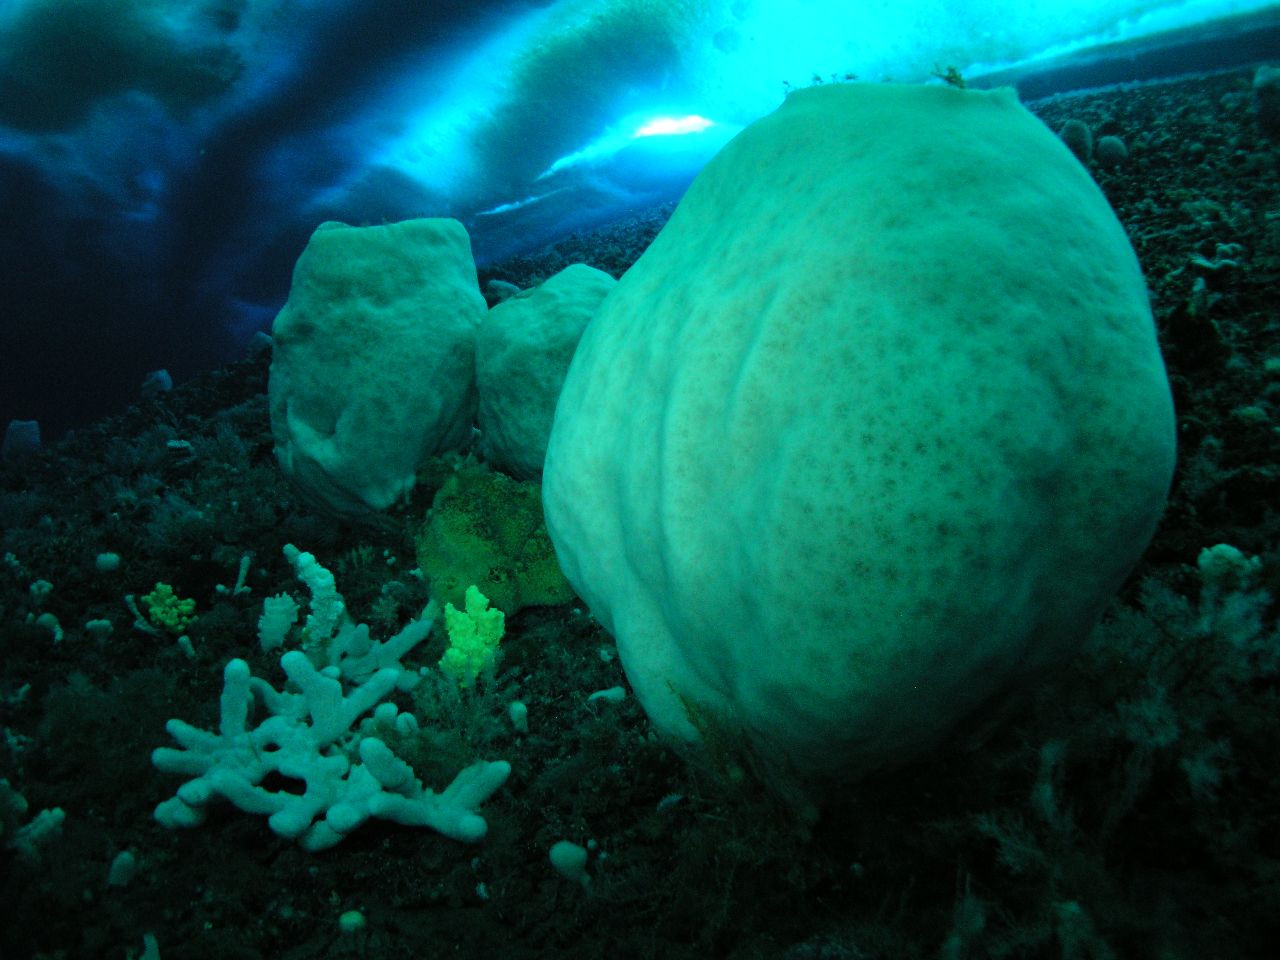 <strong>LIVING ANIMAL -- approximately 15,000 years: </strong>The volcano sponges of Antarctica, Anoxycalyx joubini, are whitish blobs that resemble giant beer barrels or miniature volcanoes. They pepper the chilly waters around McMurdo Sound.